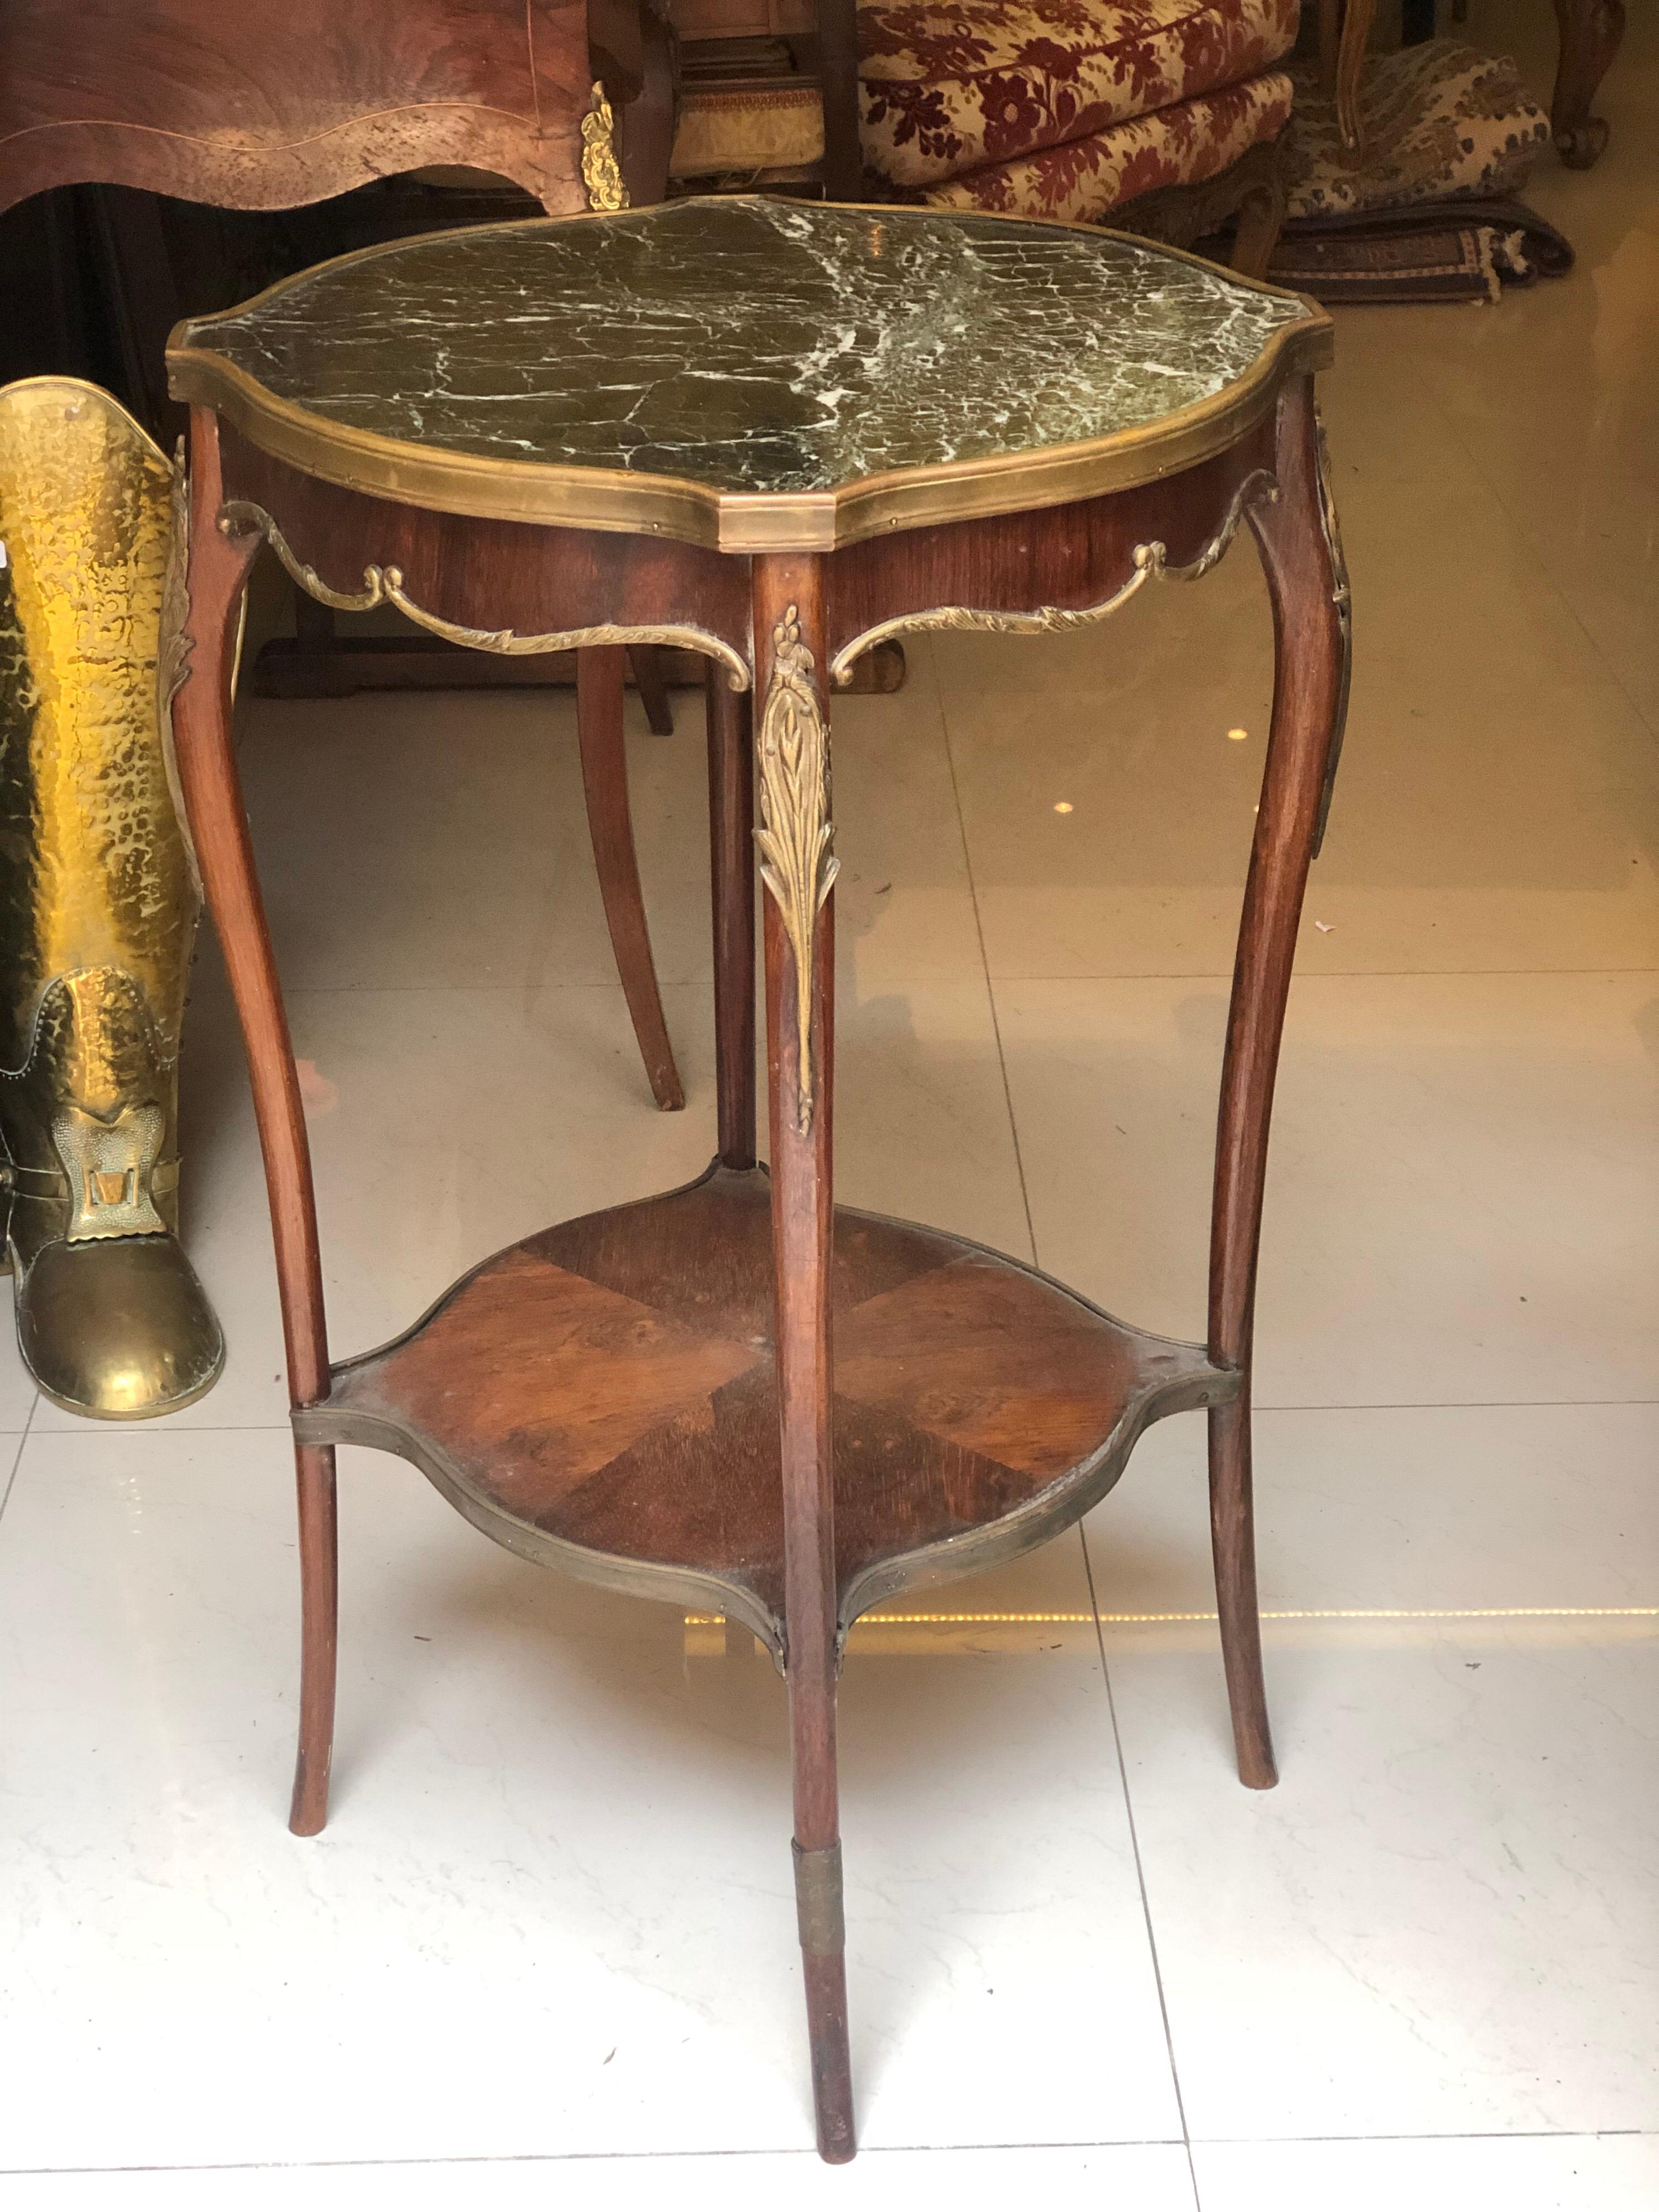 Elegant round pedestal table in veneered wood and bronze elements, arched legs joined by a crotch plate, built-in marble tray, Louis XV style.
France, circa 1870.
Measures: H 75, D 44 cm.